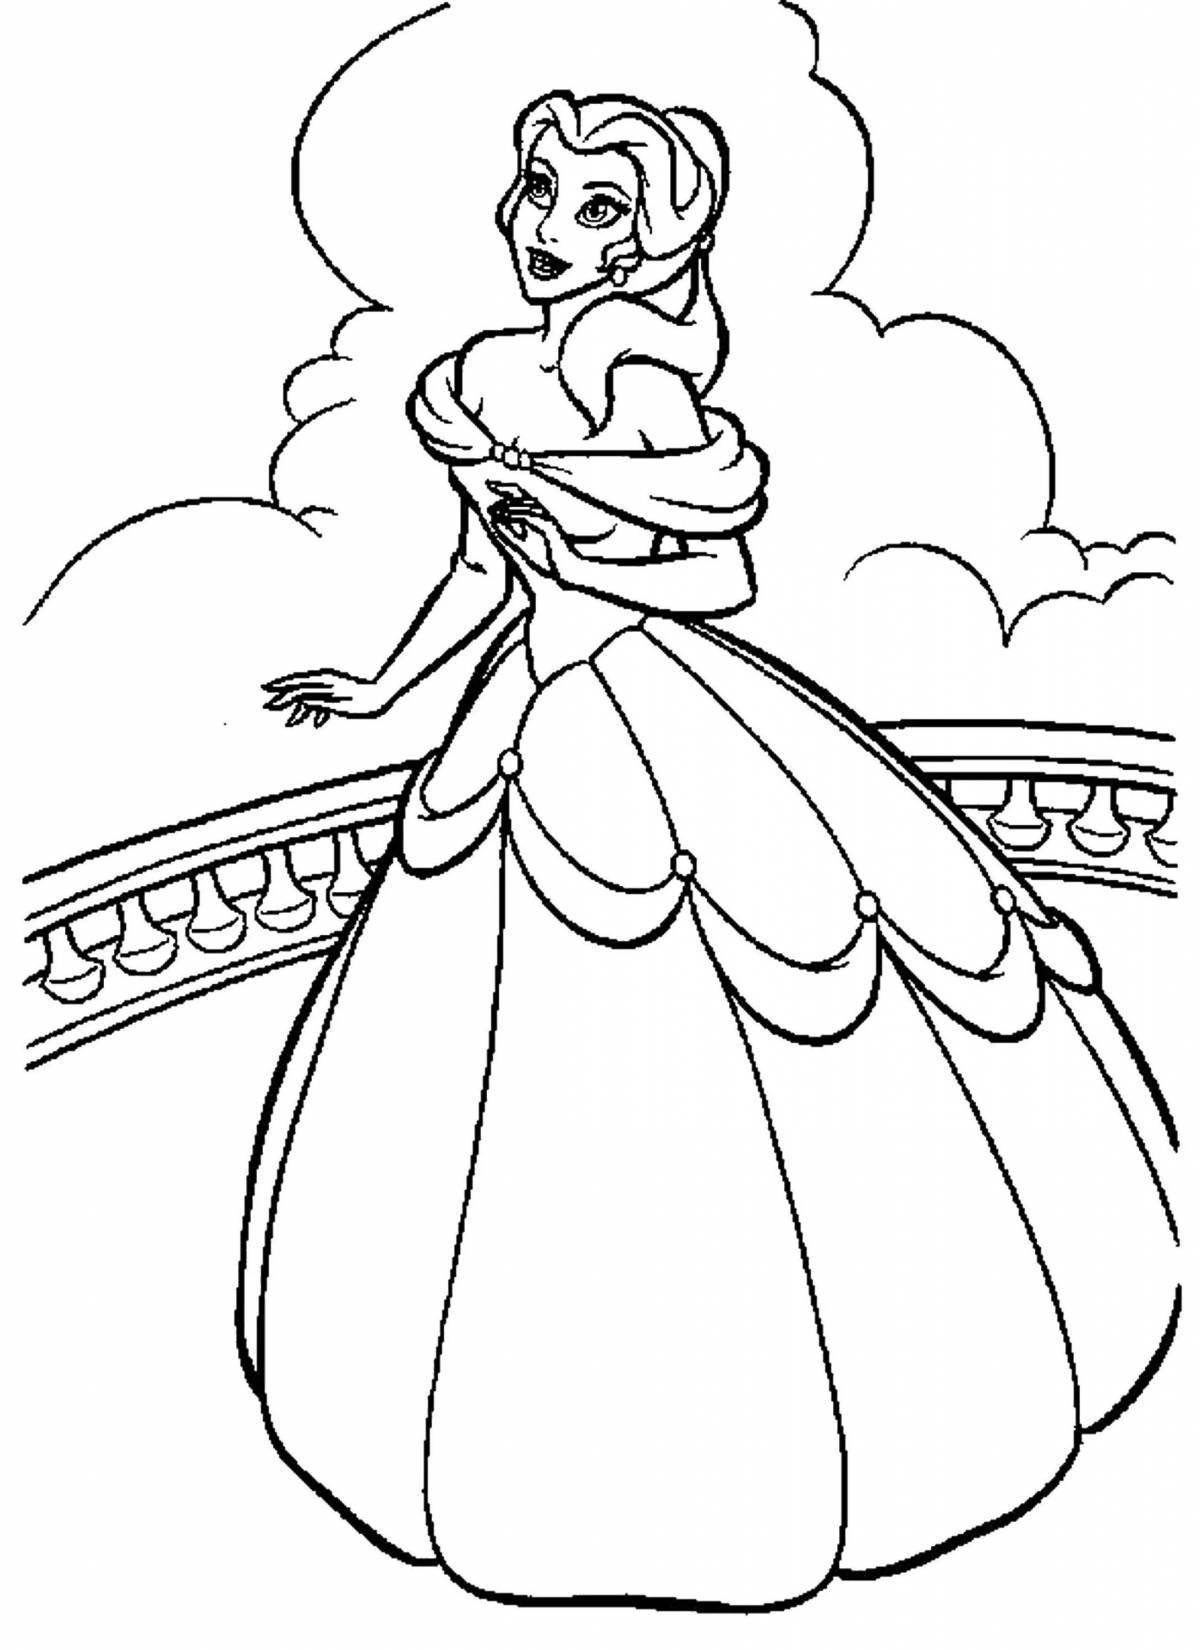 Awesome coloring pages of cartoon princesses